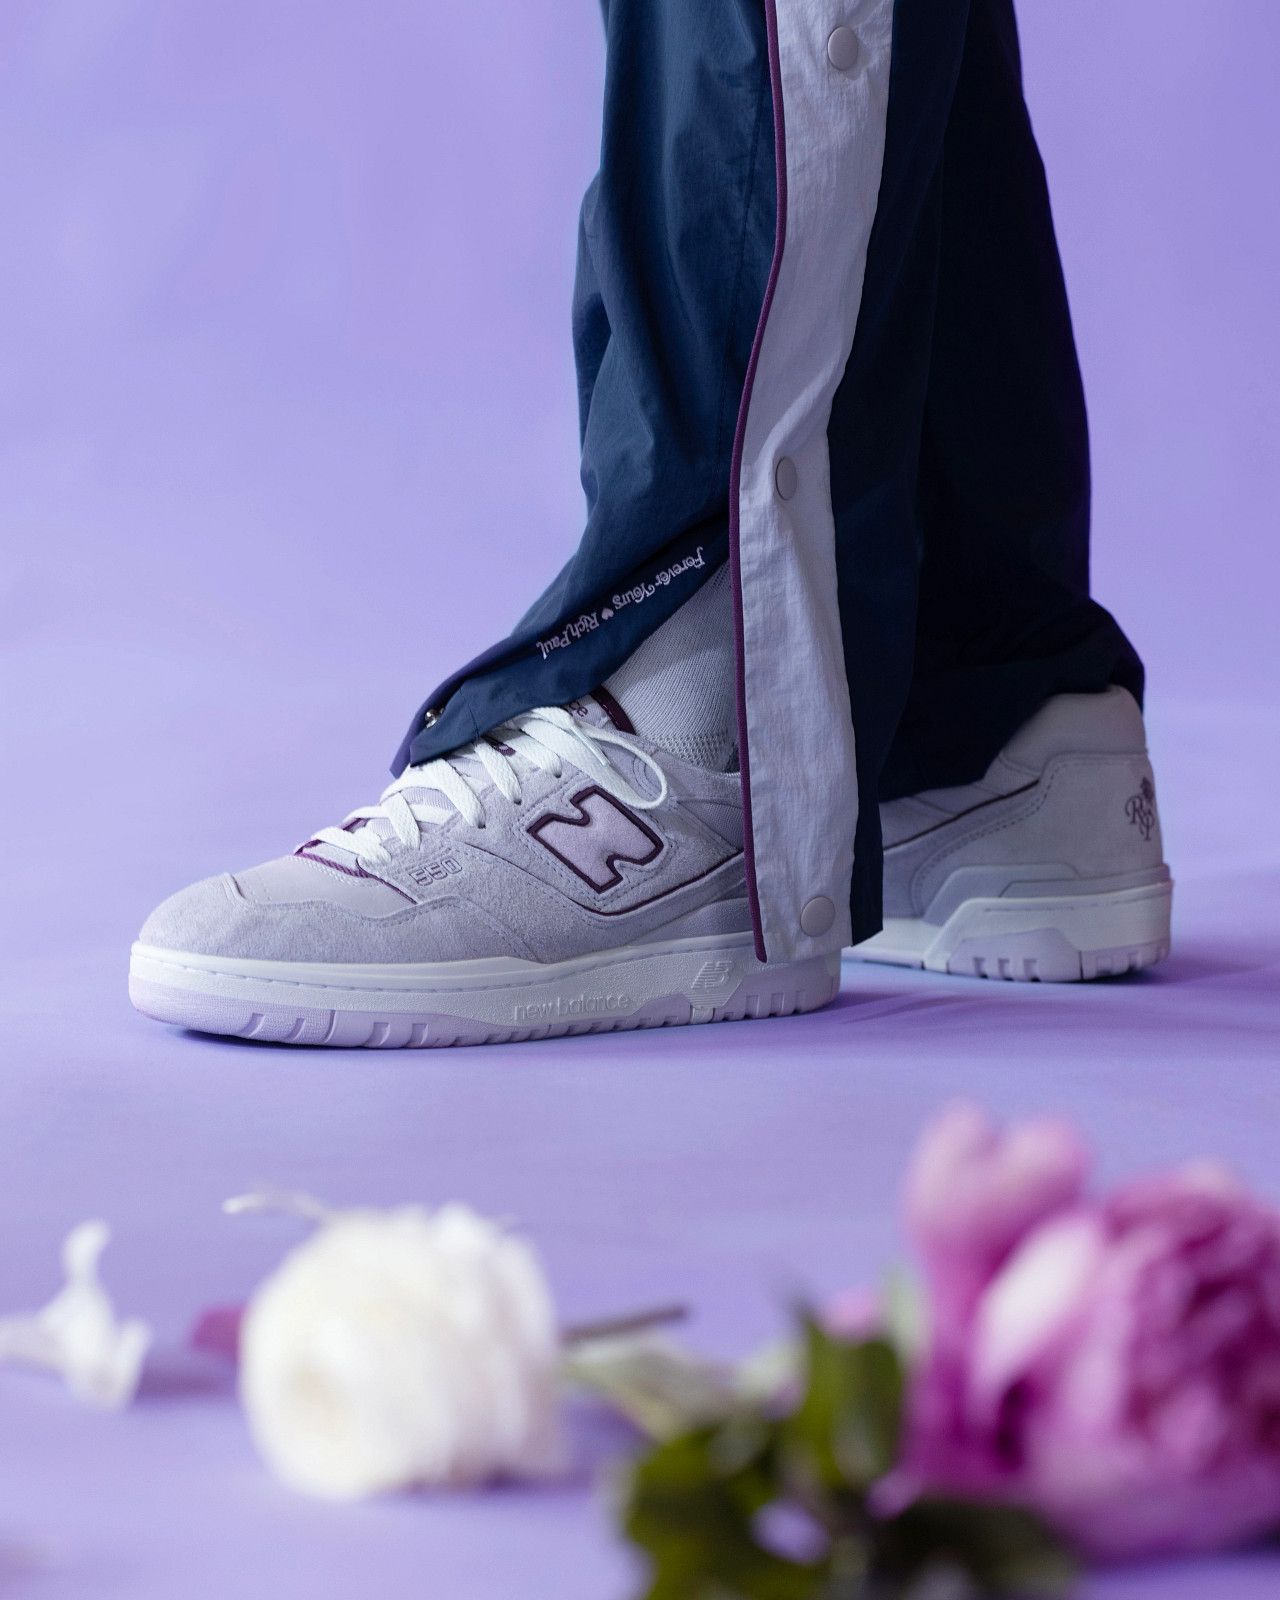 Rich Paul on New Balance 550 Forever Yours Collaboration